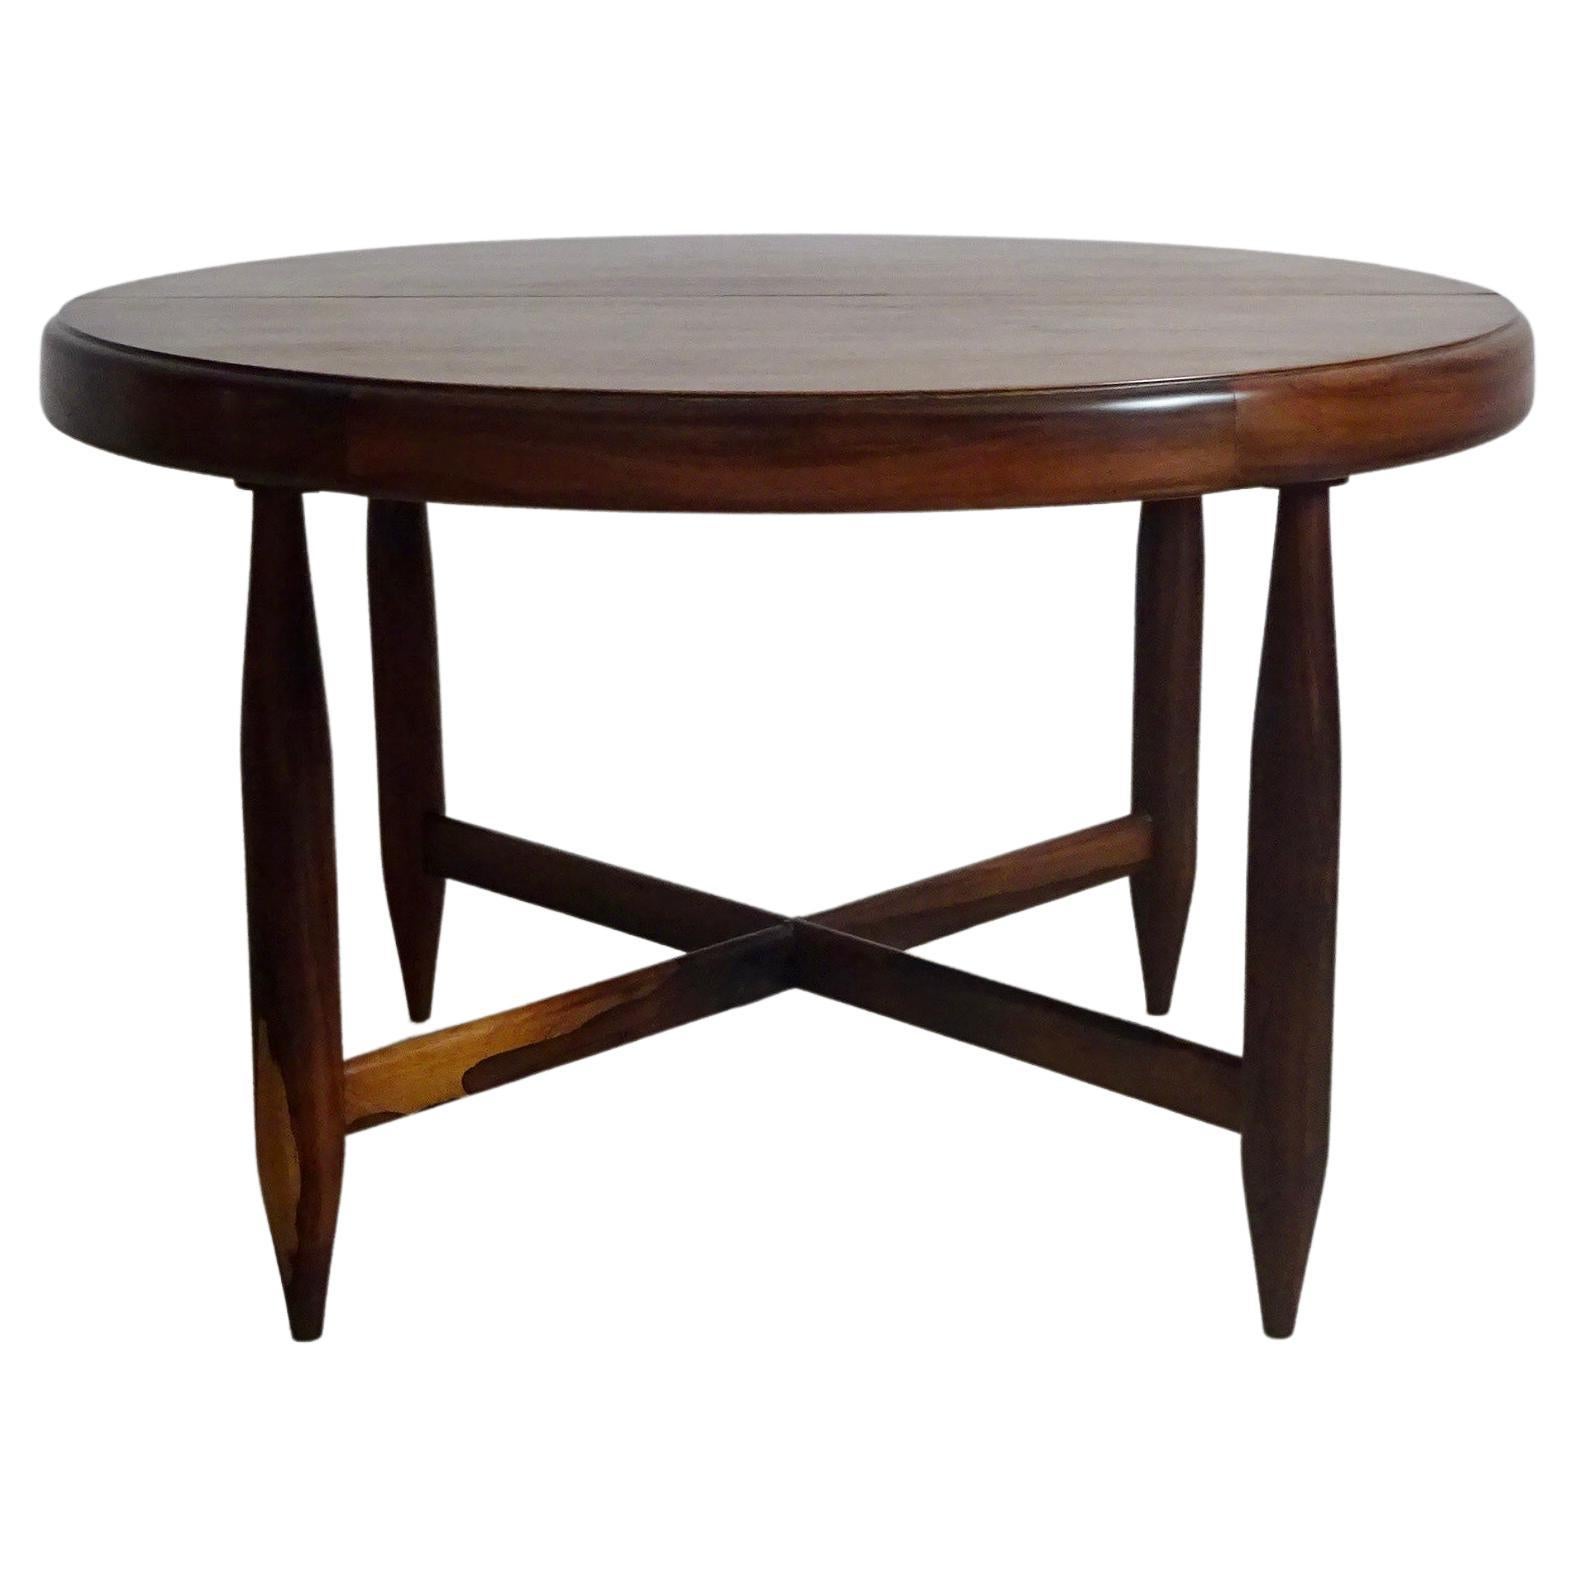 Mid-Century Modern Dining Table by Jorge Jabour Mauad, Brazil, 1960s